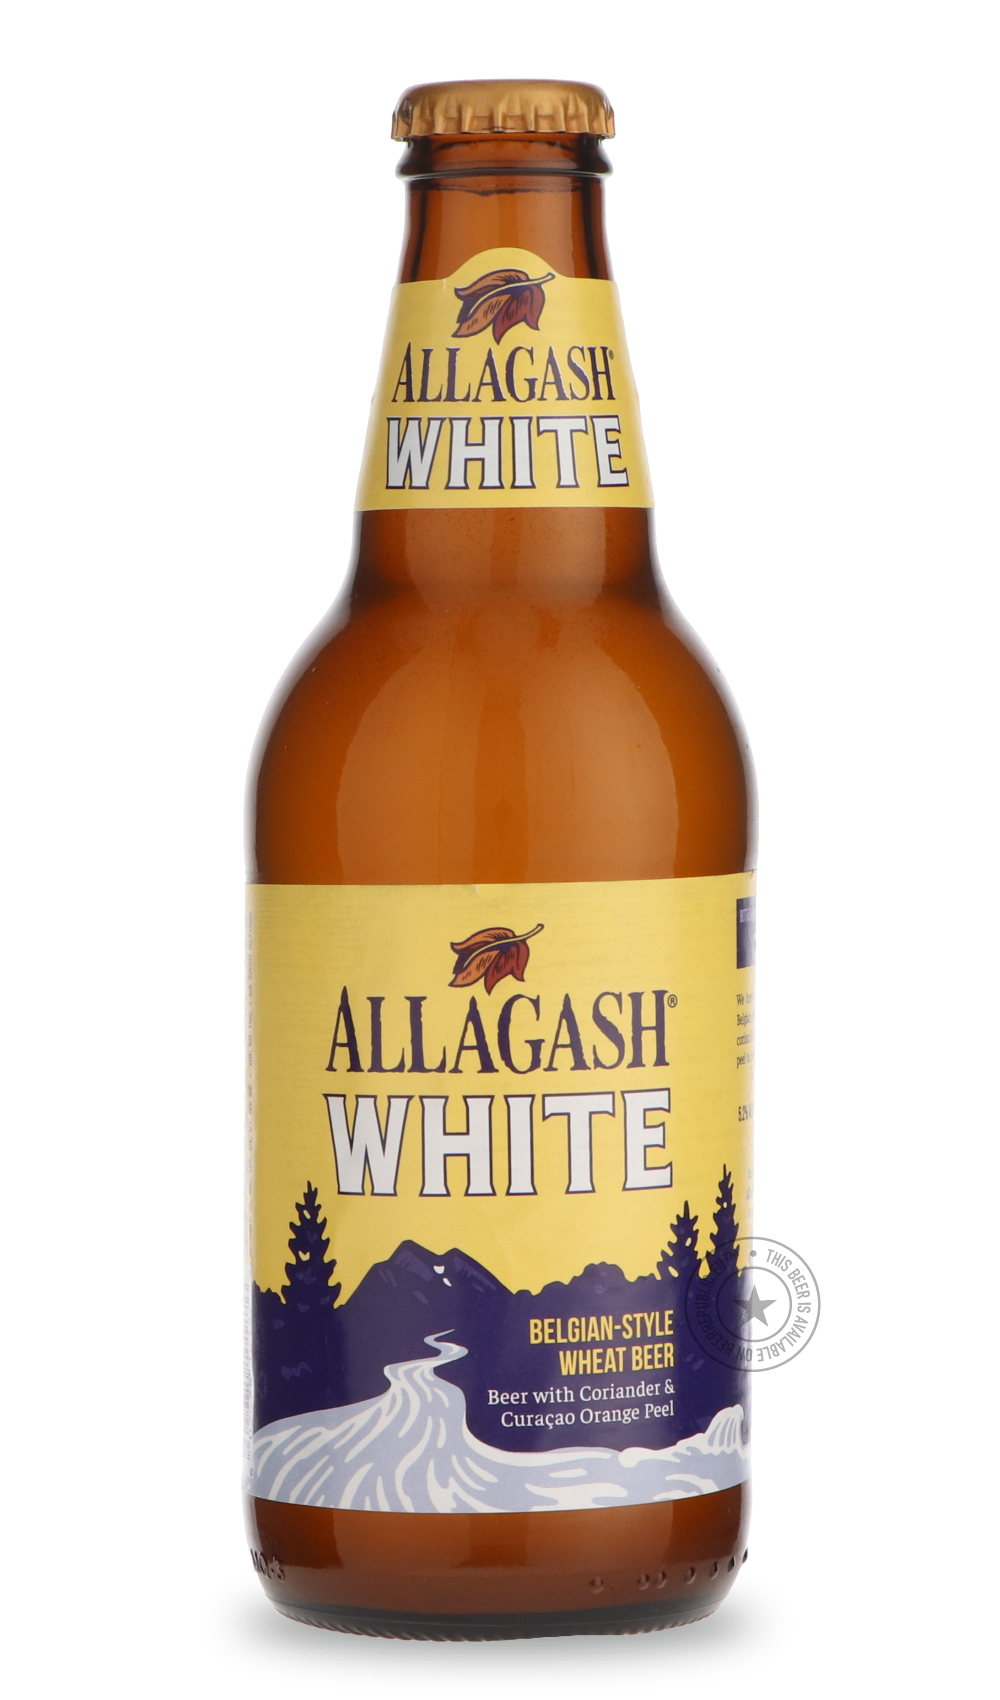 -Allagash- White [355ml bottle]-Pale- Only @ Beer Republic - The best online beer store for American & Canadian craft beer - Buy beer online from the USA and Canada - Bier online kopen - Amerikaans bier kopen - Craft beer store - Craft beer kopen - Amerikanisch bier kaufen - Bier online kaufen - Acheter biere online - IPA - Stout - Porter - New England IPA - Hazy IPA - Imperial Stout - Barrel Aged - Barrel Aged Imperial Stout - Brown - Dark beer - Blond - Blonde - Pilsner - Lager - Wheat - Weizen - Amber - 